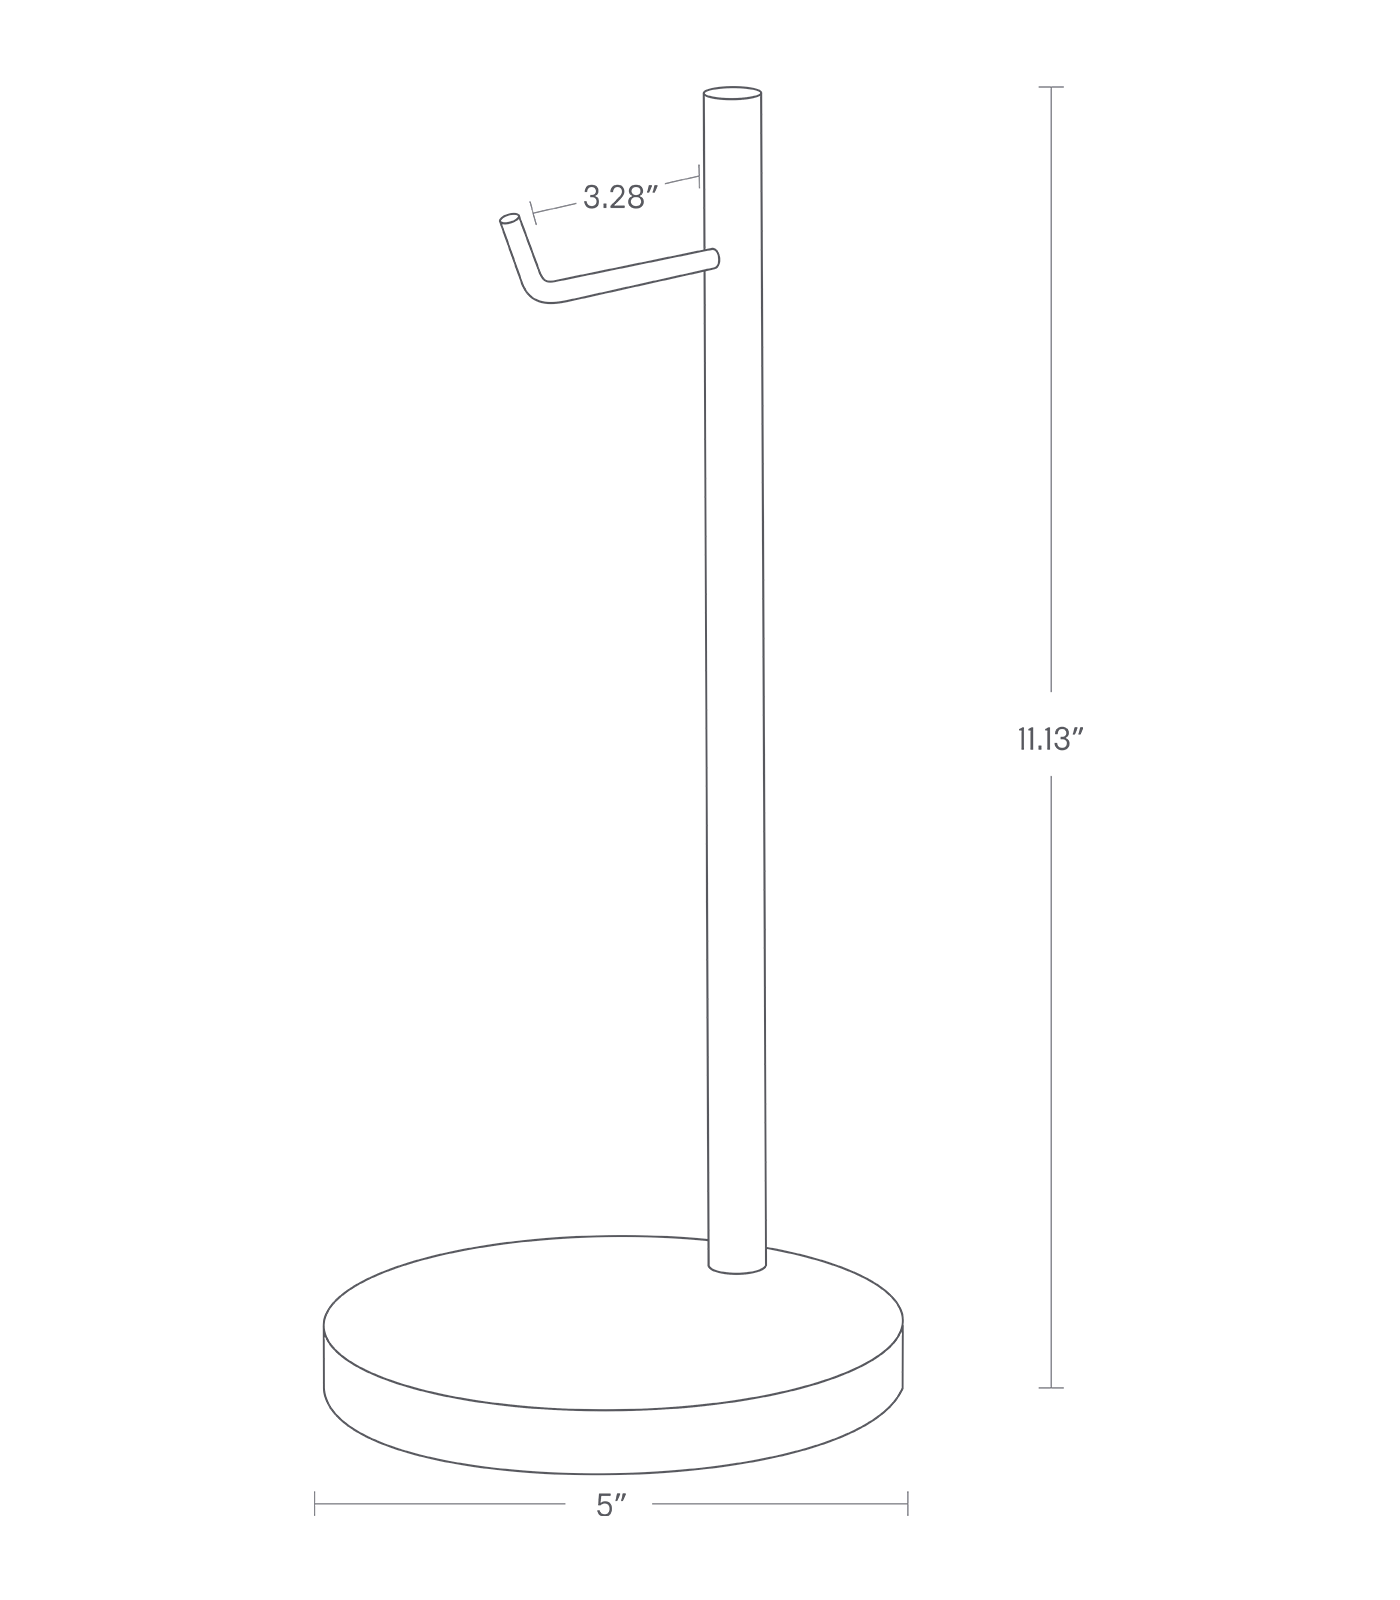 Dimension image for Headphone Stand on a white background including dimensions  L 5.12 x W 5.12 x H 11.02 inches